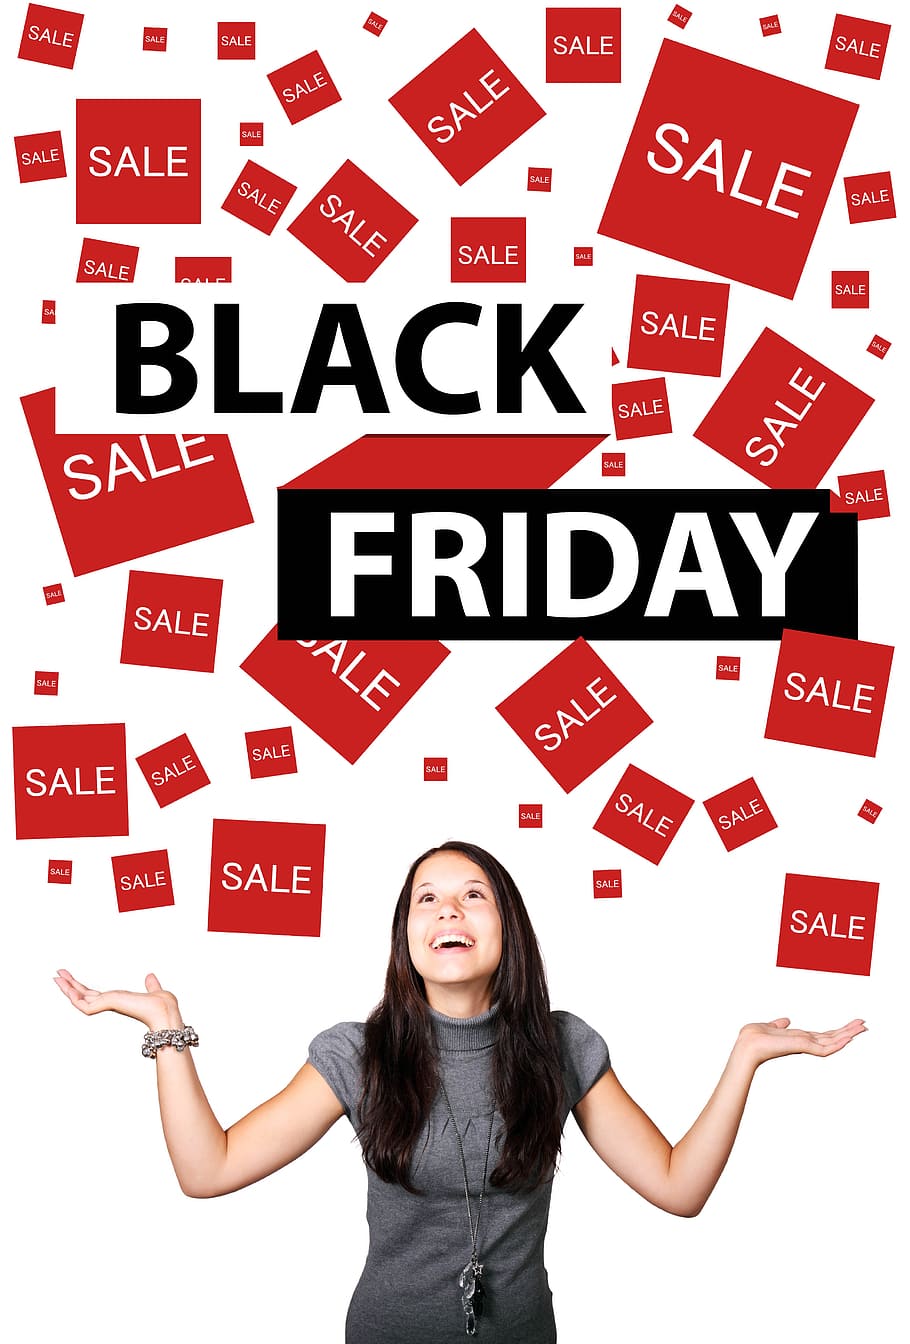 woman, pointing, black, friday signage, black friday, discounts, discount, promotion, offer, sale